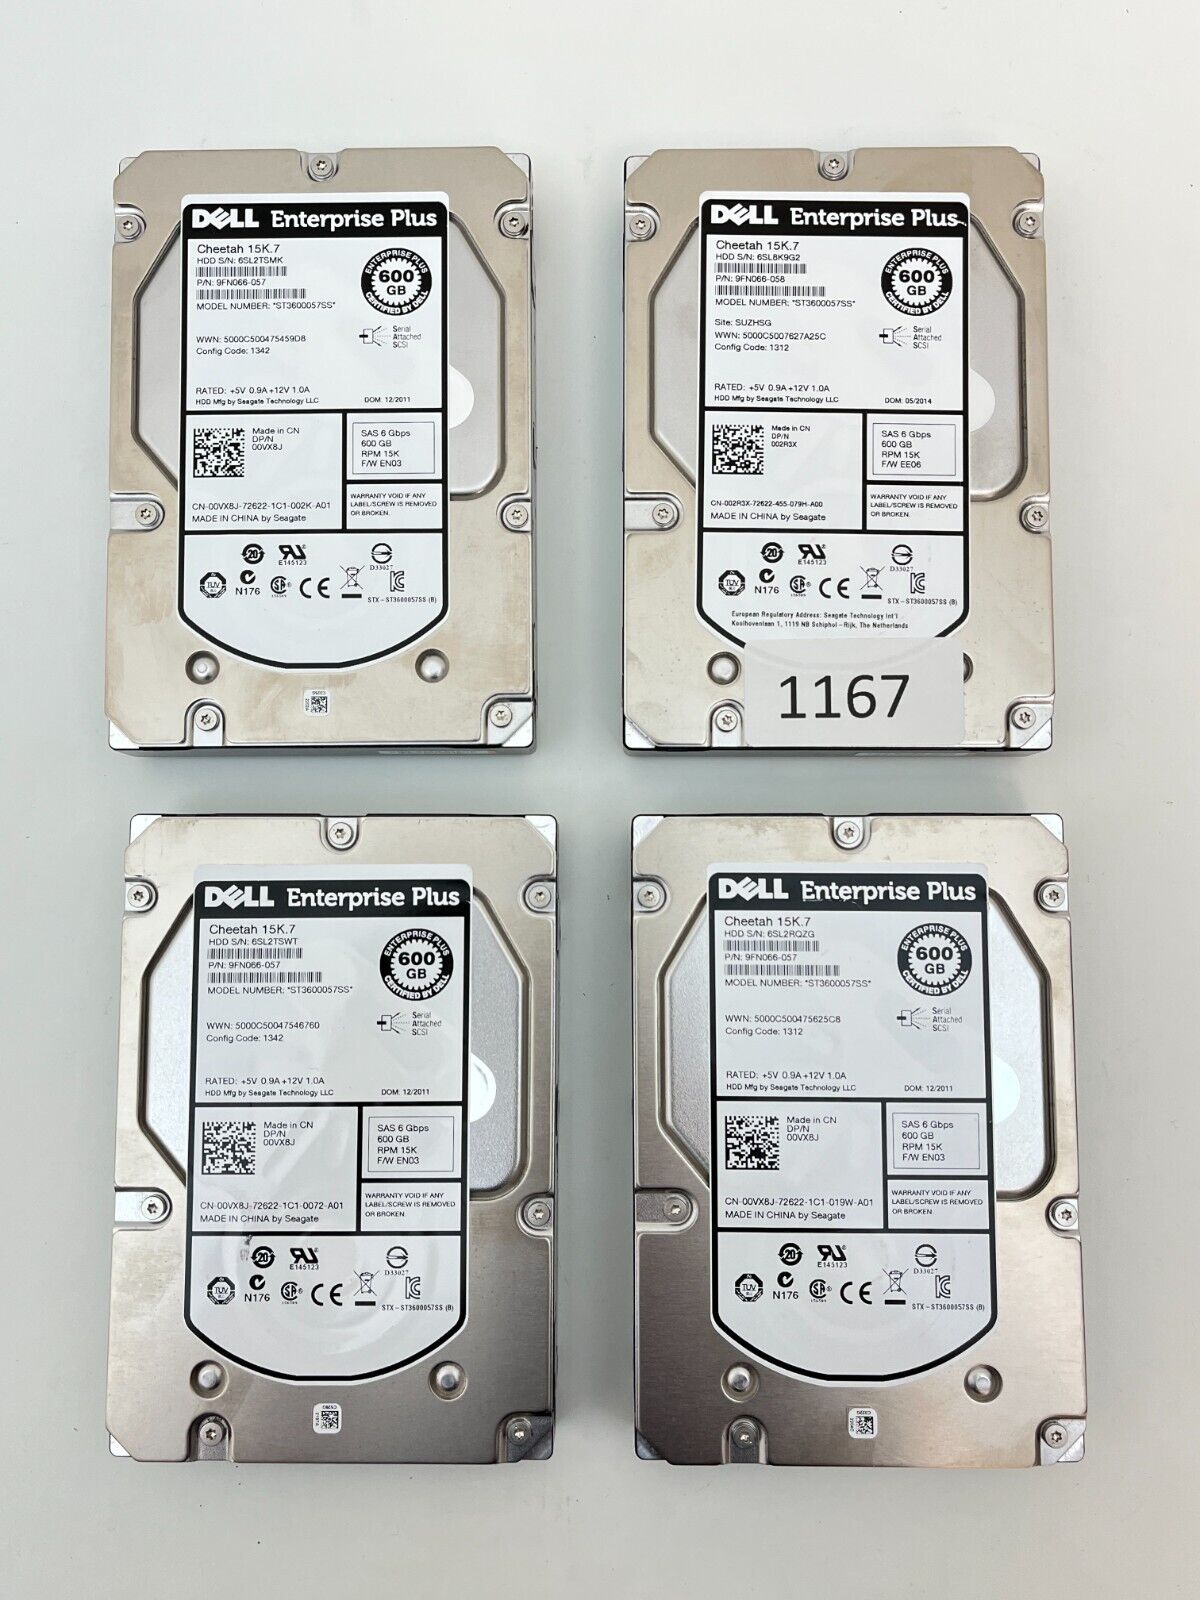 Lot of 4 Dell 600GB 3.5 INCH 15K SAS Hard Disk Drives 9FN066-058 002R3X